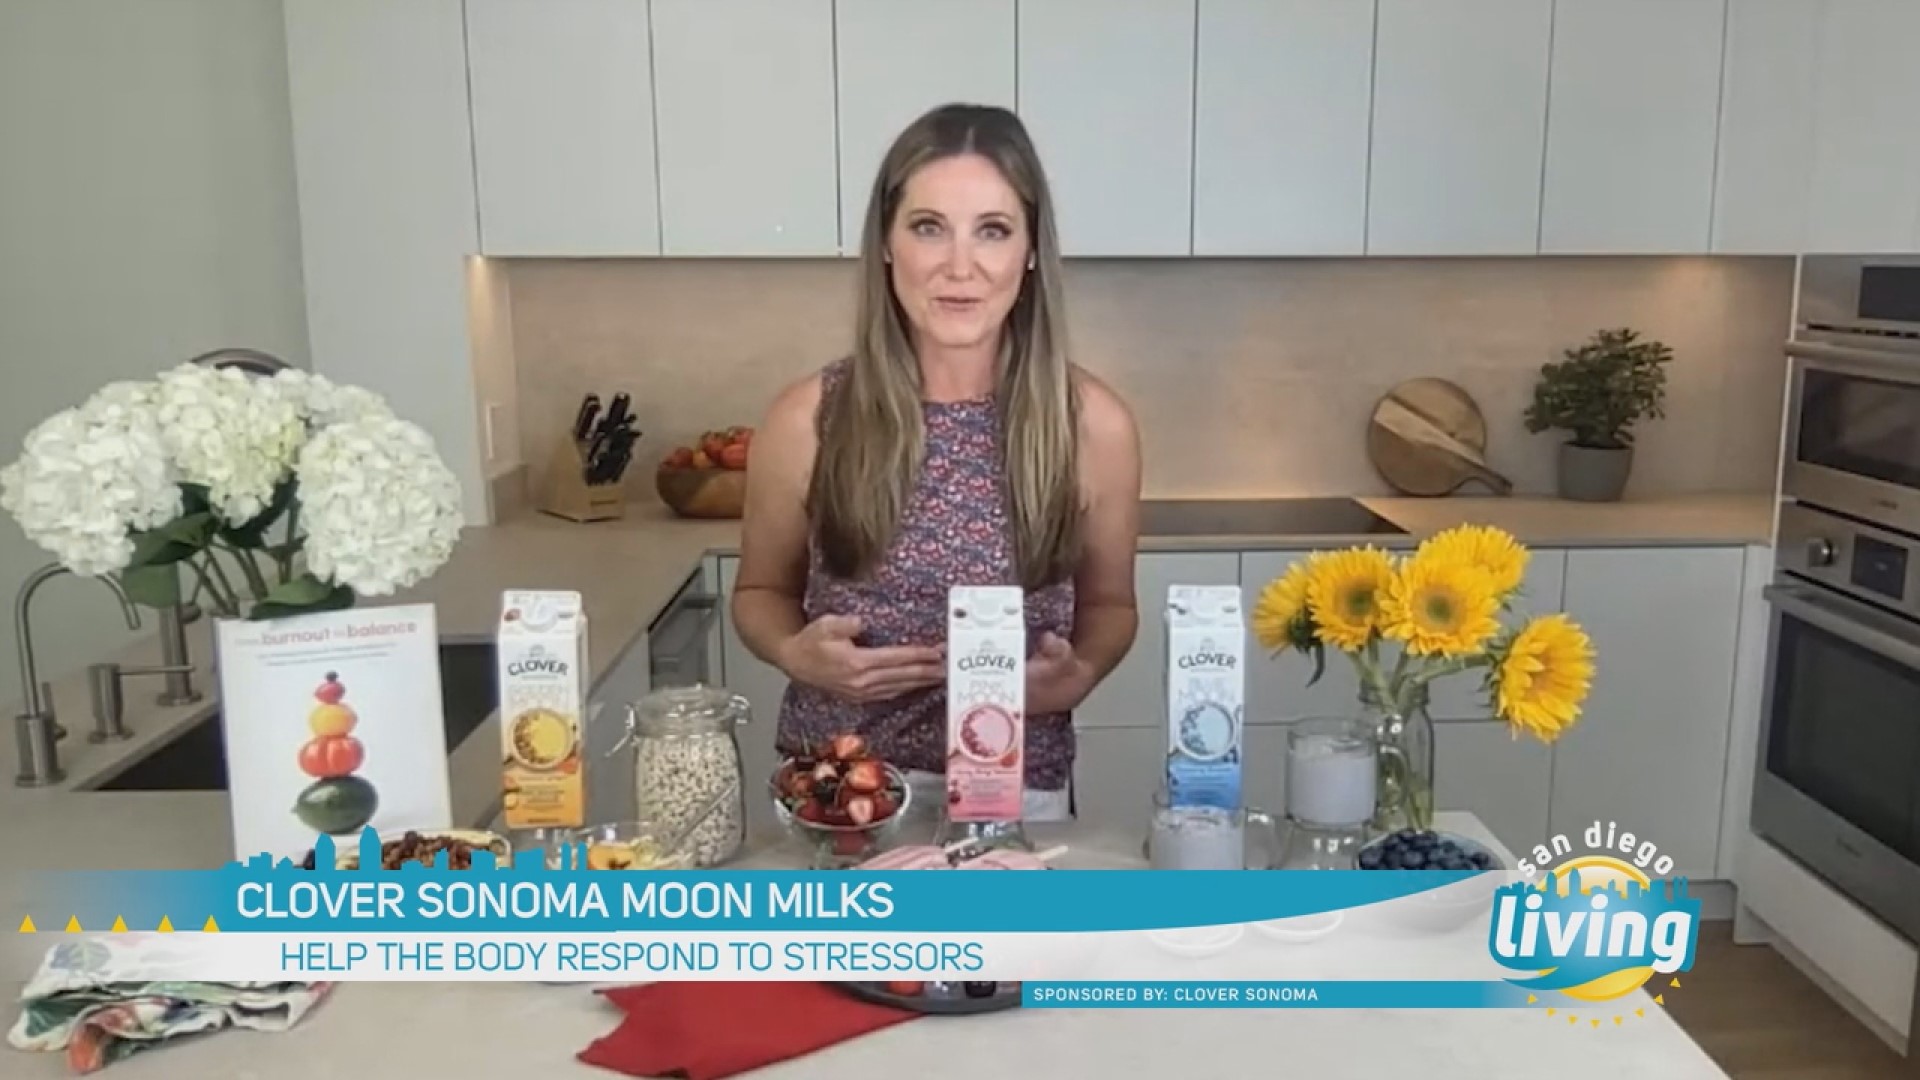 Unwind and Shine with Clover Sonoma Moon Milks. Sponsored by: Clover Sonoma